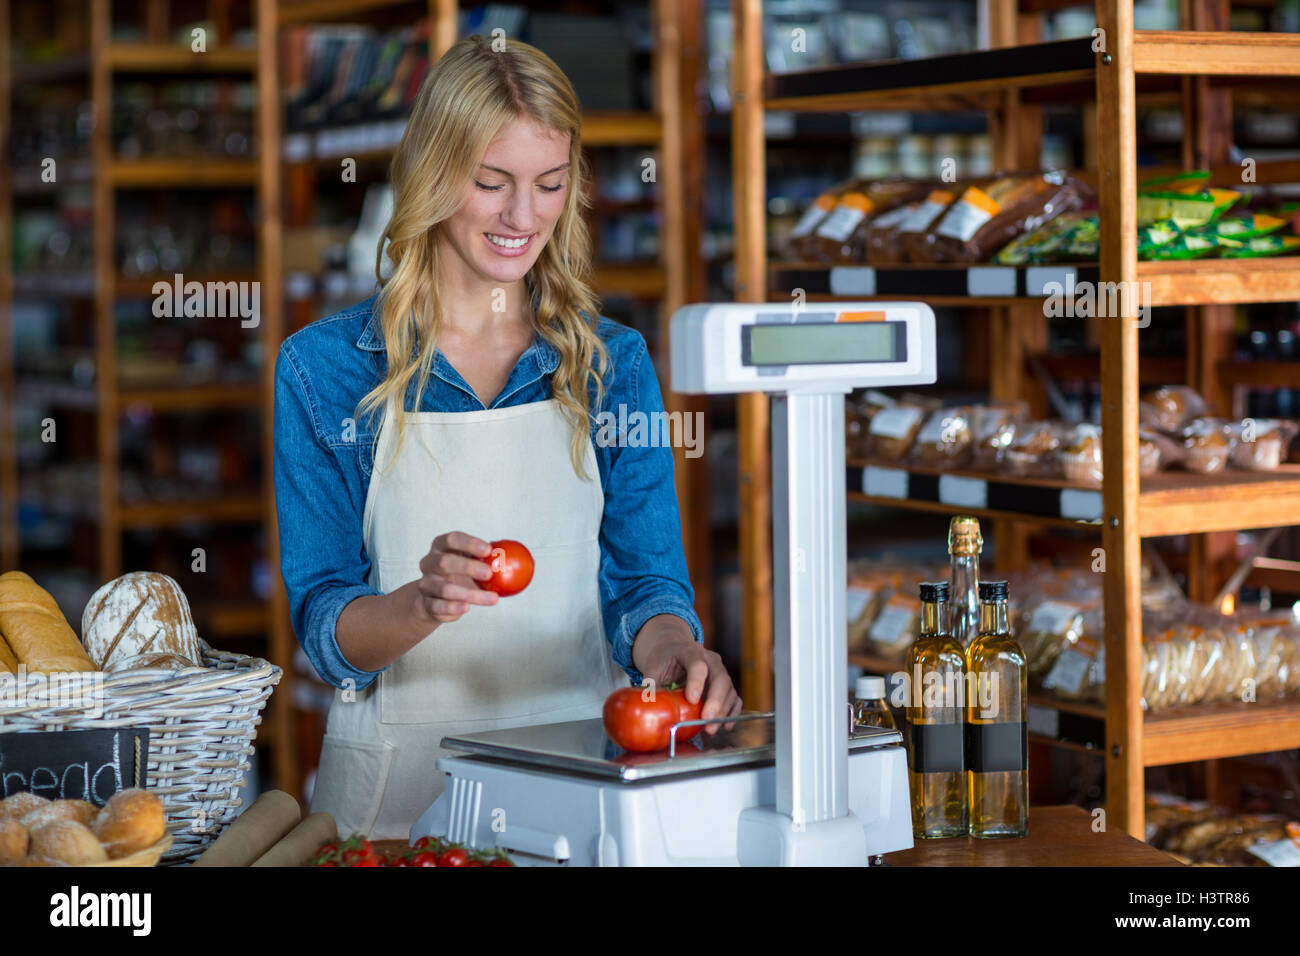 Female staff weighting vegetables on scale Stock Photo